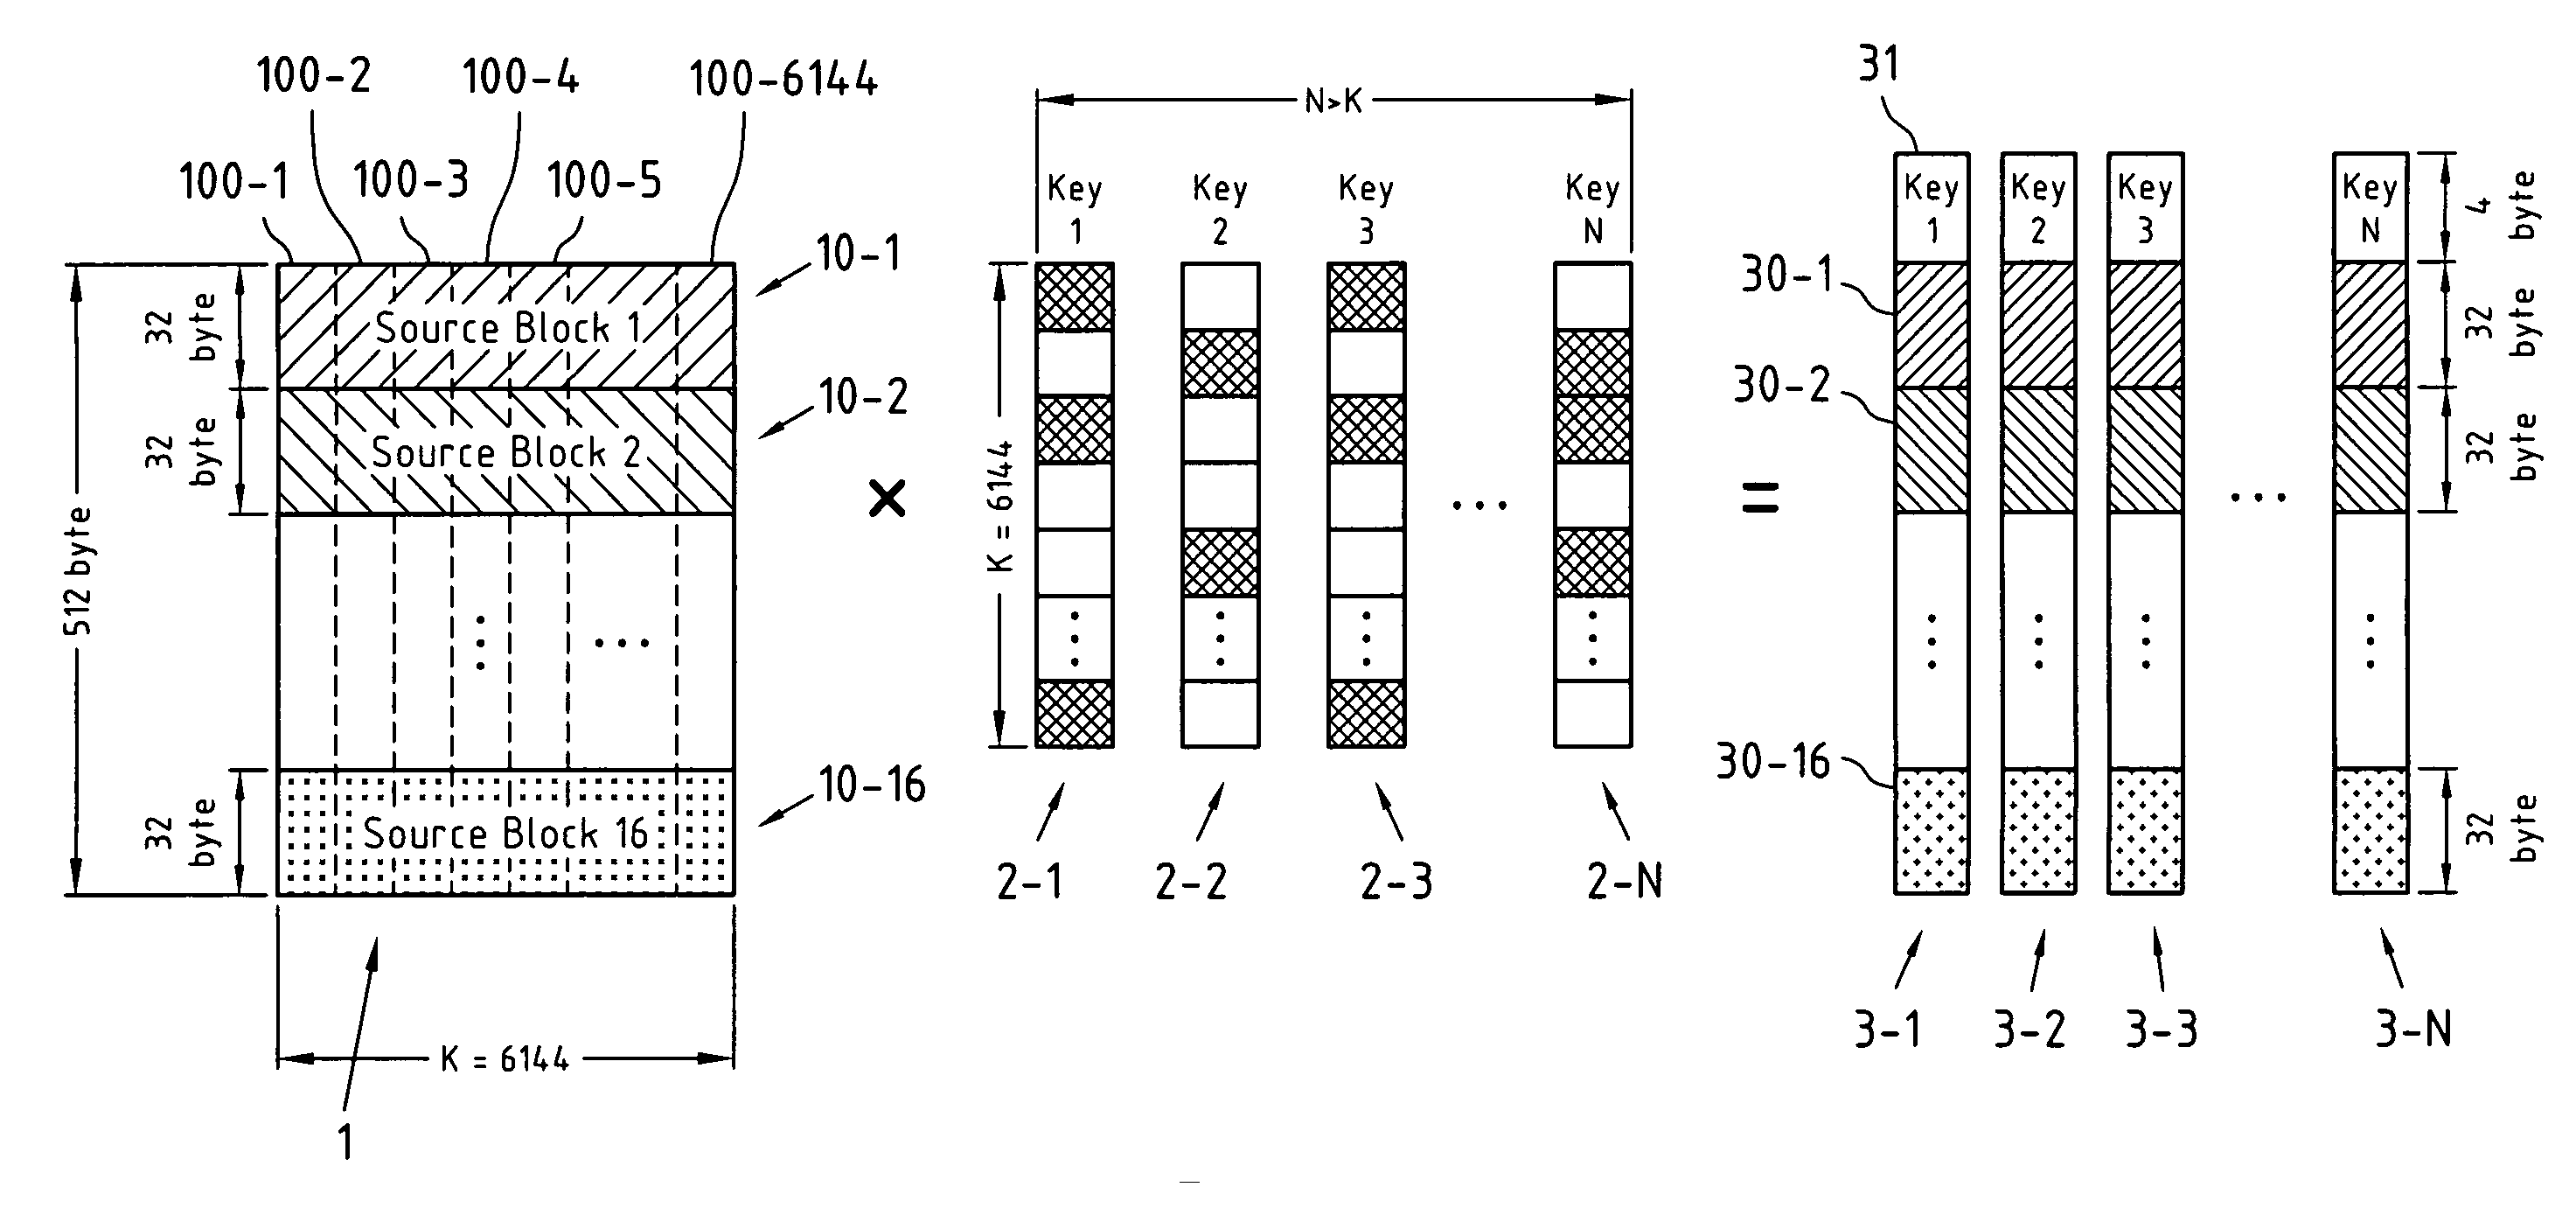 Point-to-point repair request mechanism for point-to-multipoint transmission systems